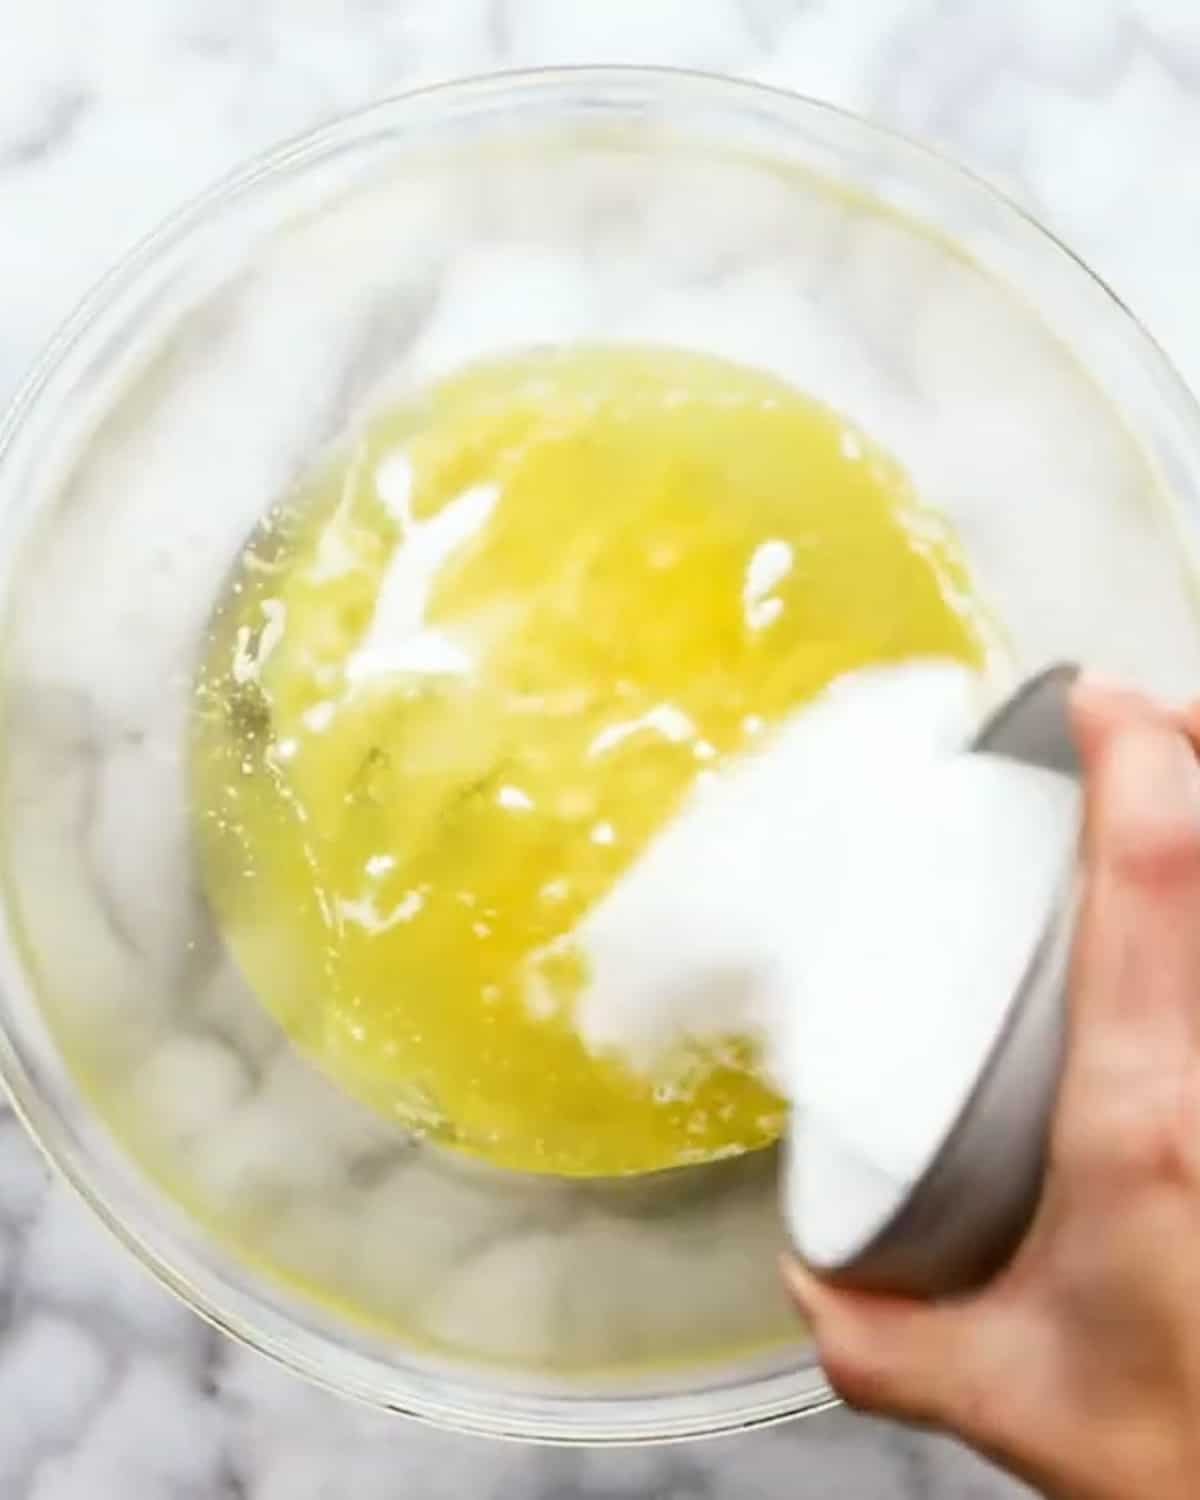 butter, oil, and sugar in a mixing bowl.